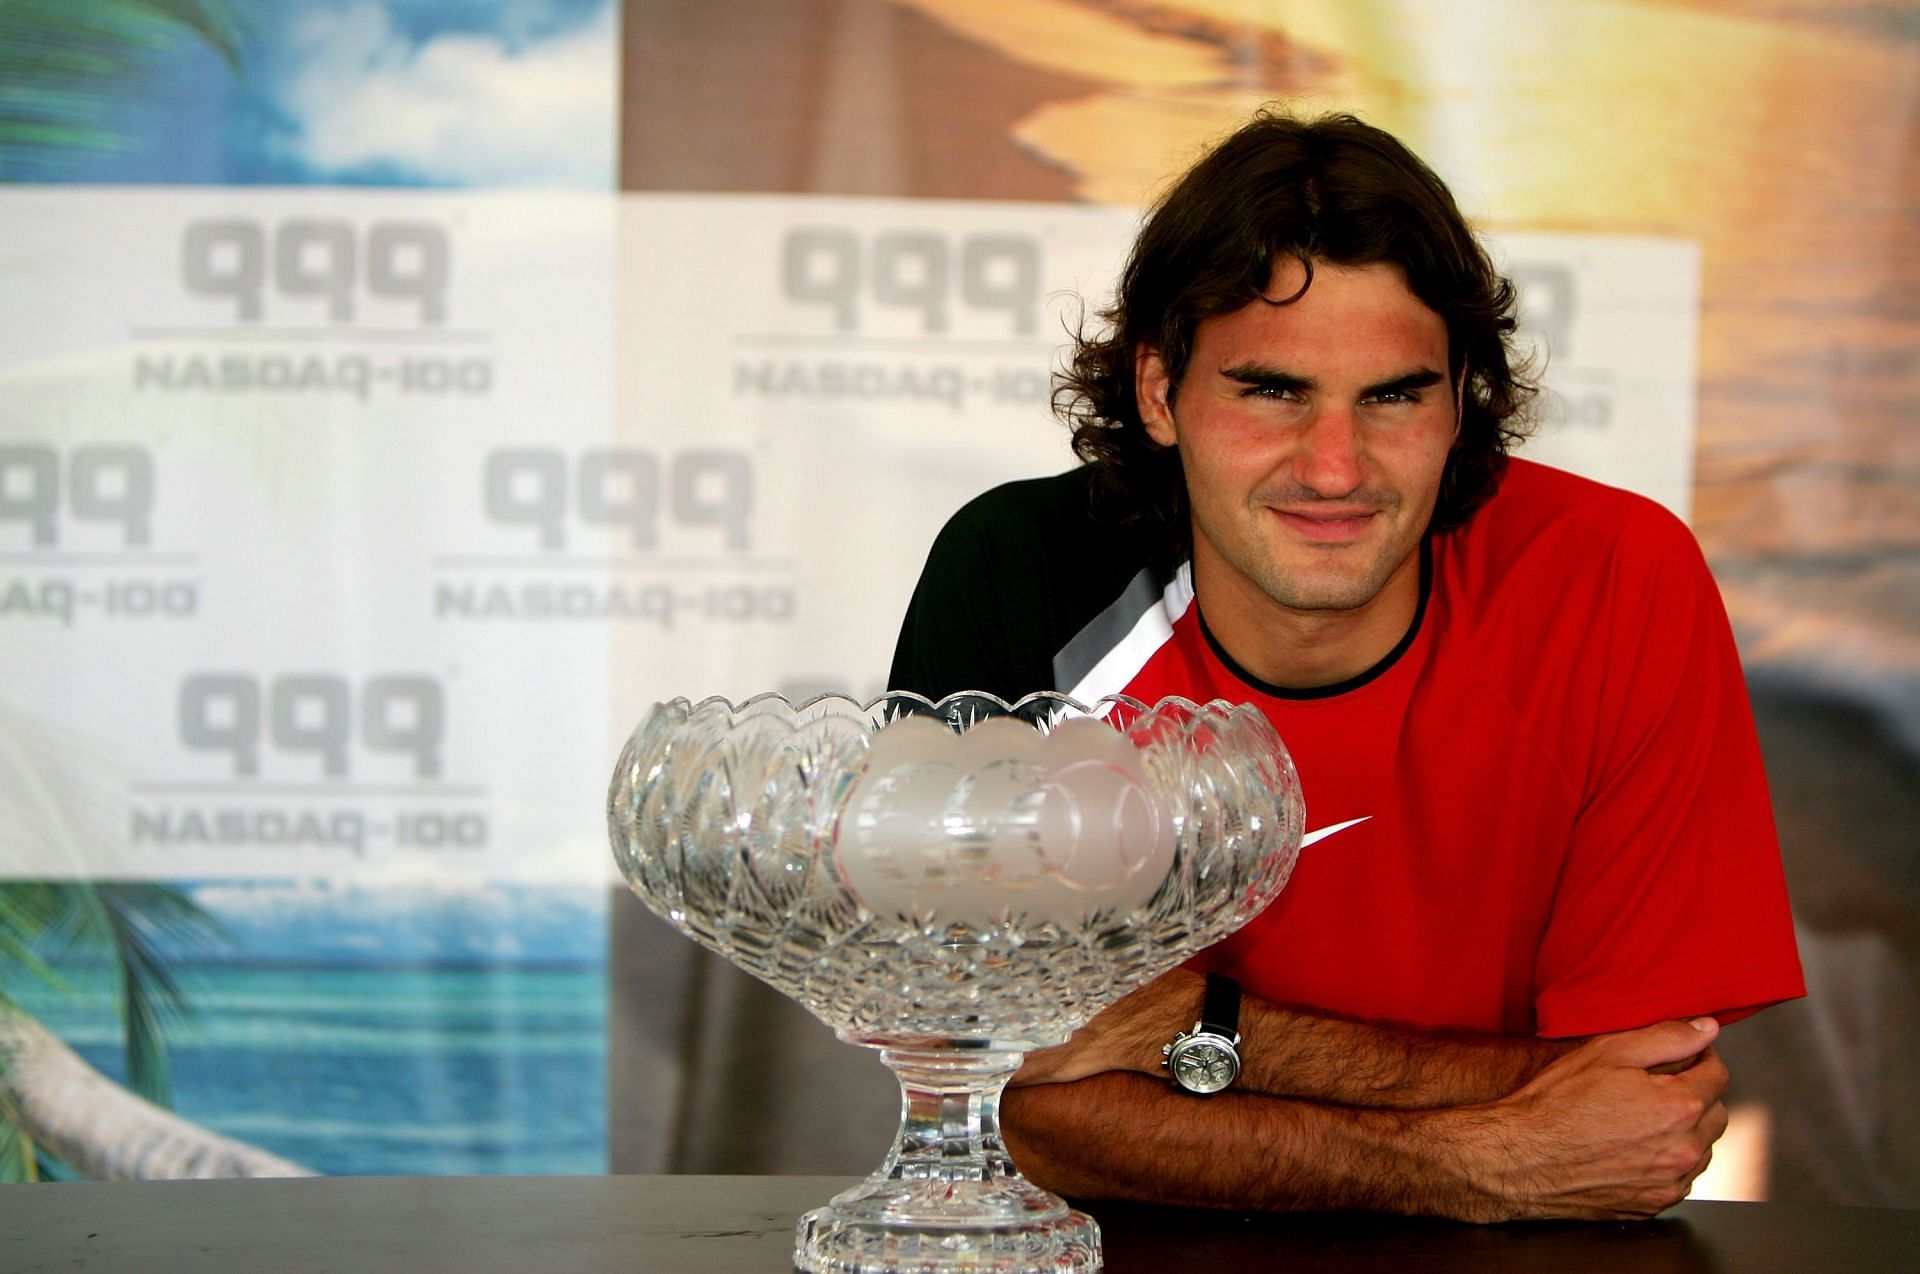 Roger Federer defeated Rafael Nadal for the first time in a final at the 2005 Miami Masters